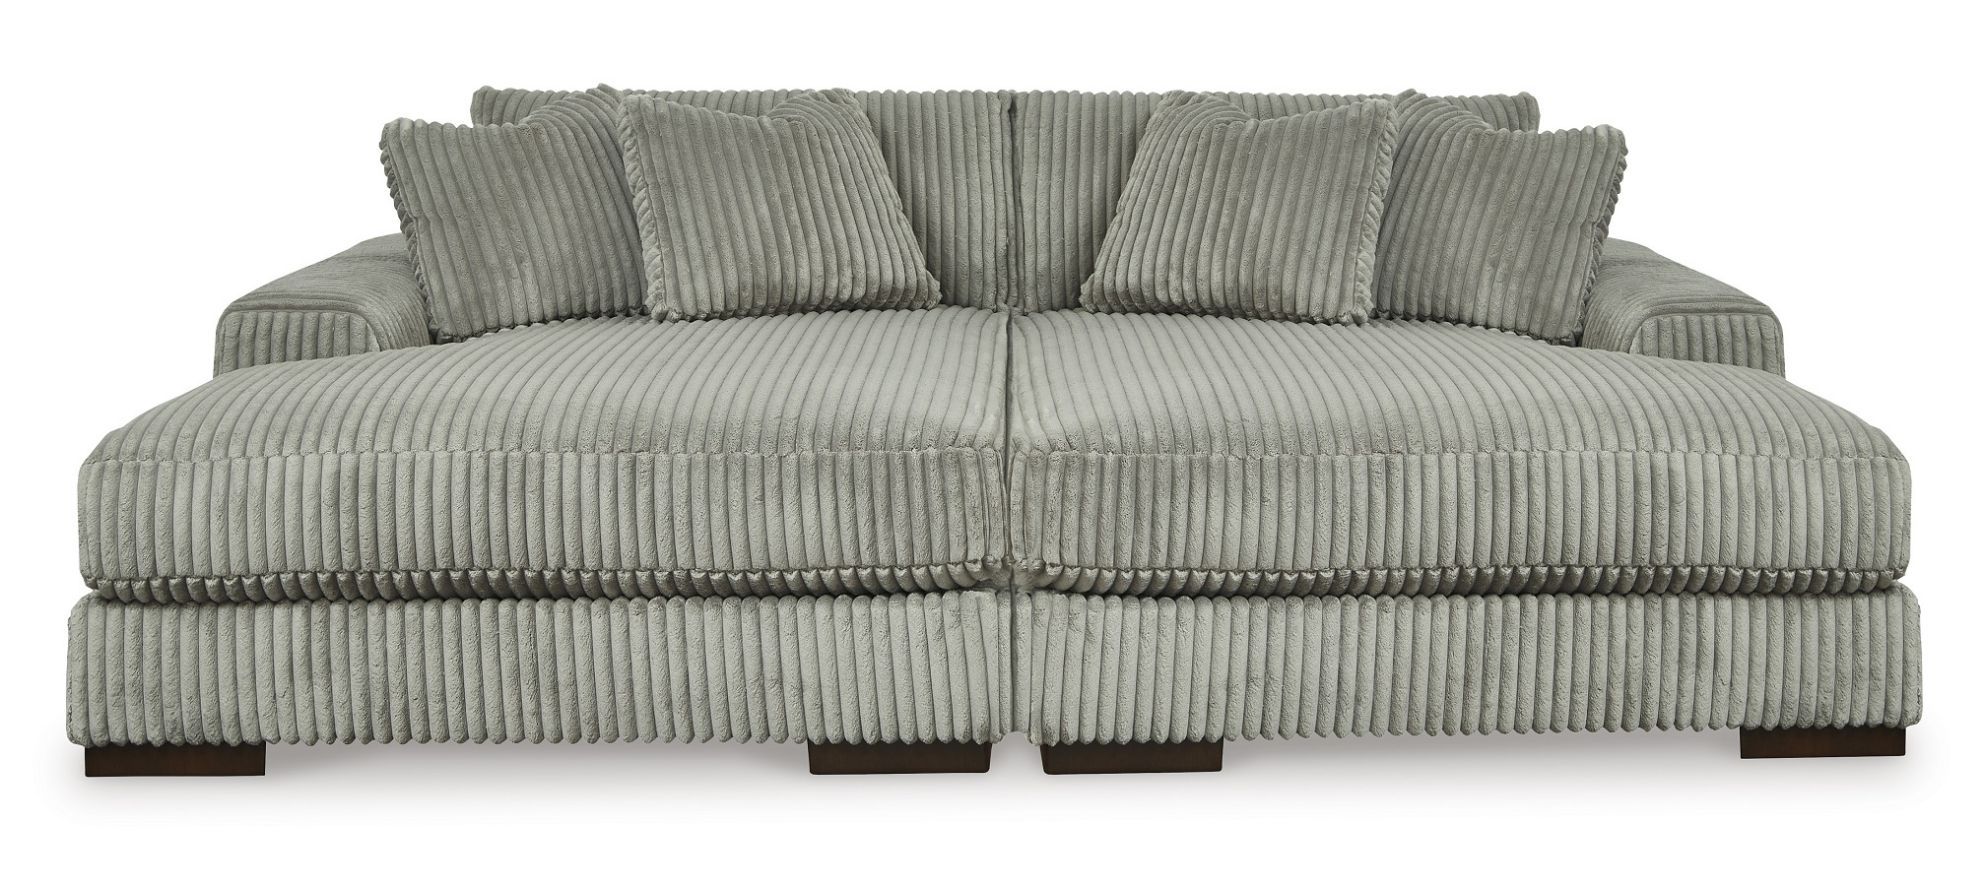 Lindyn Double Chaise Lounger